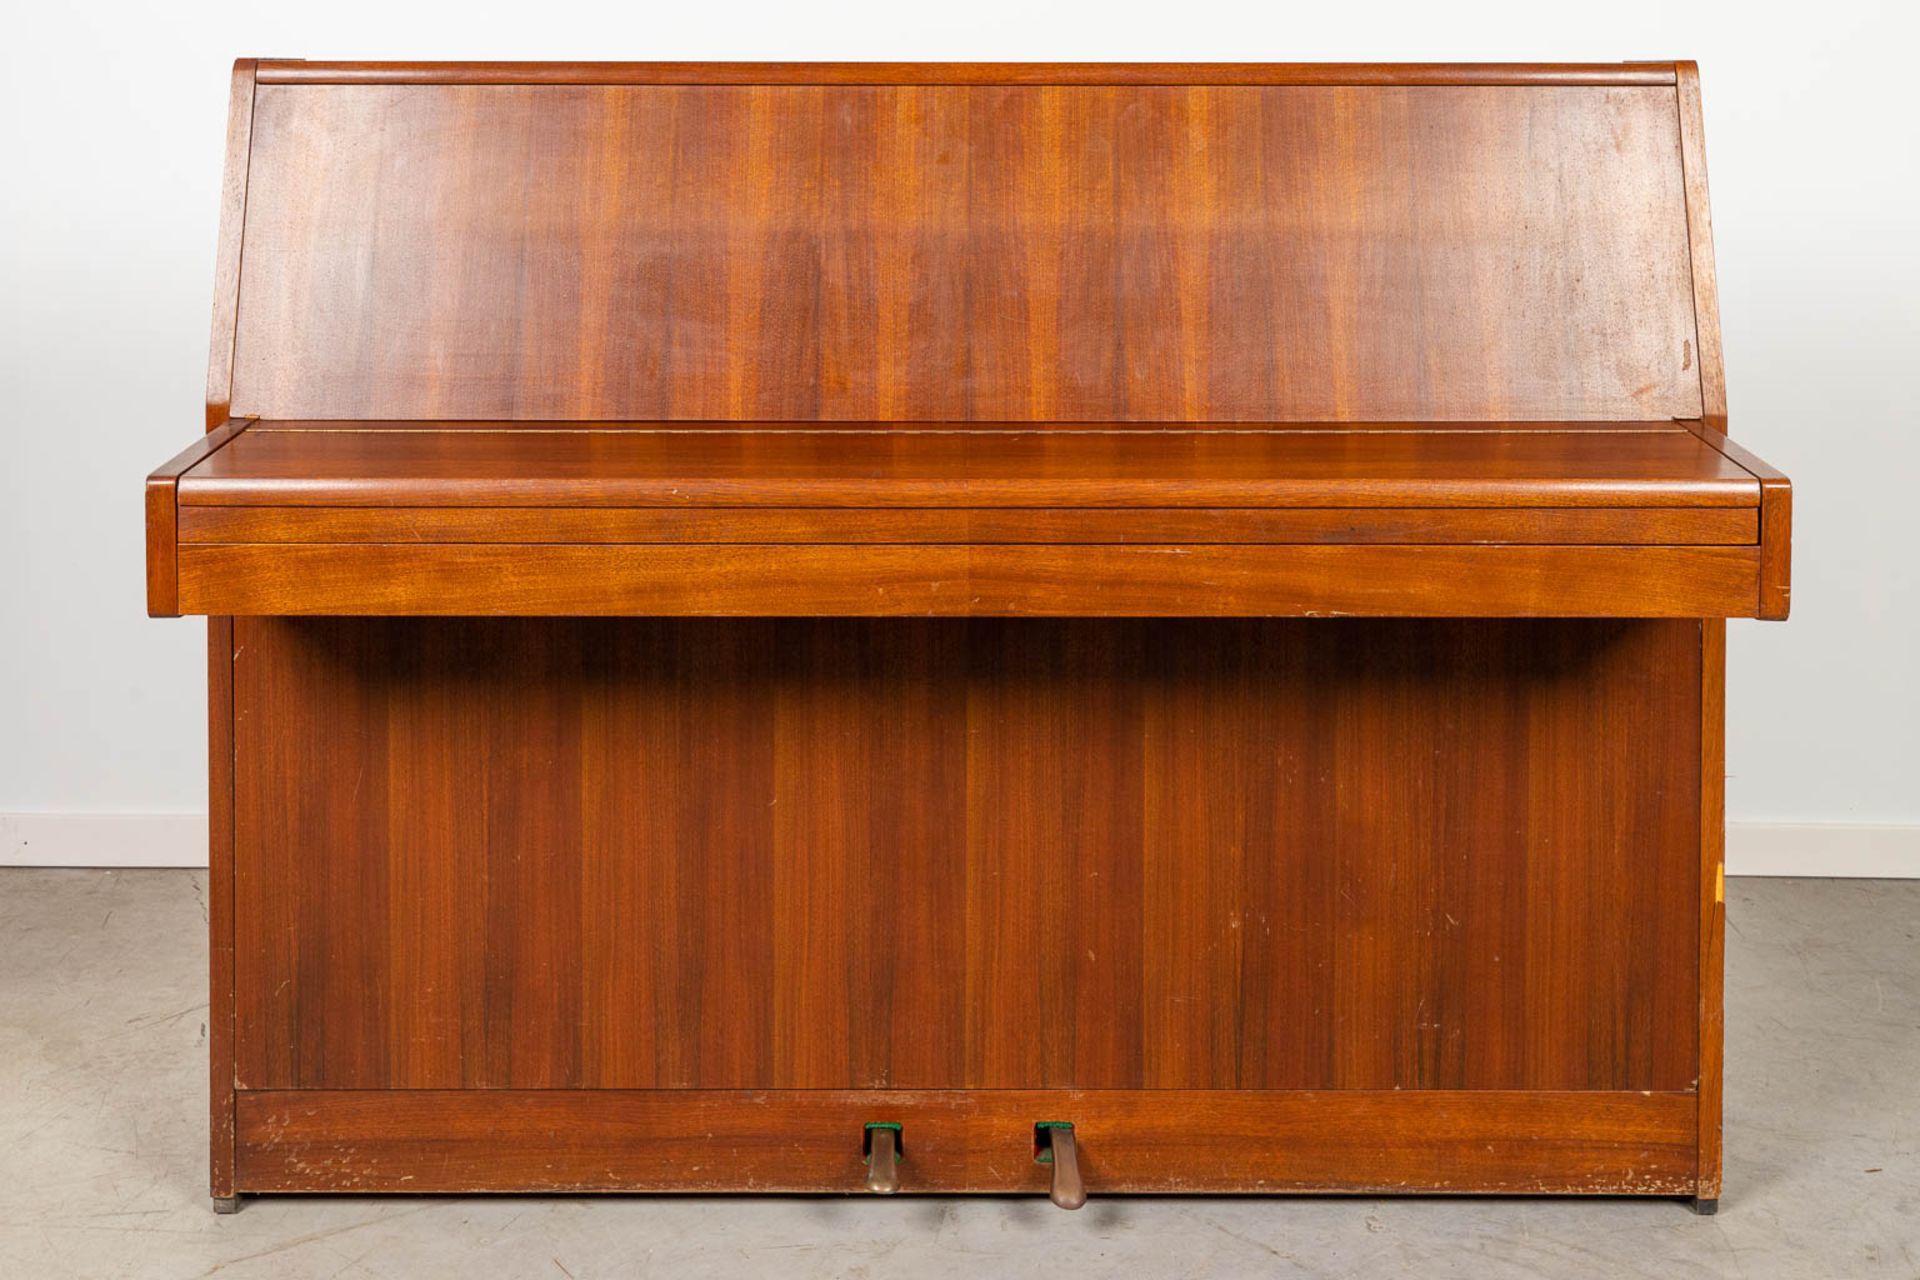 An upright piano with a steel frame and marked Rippen. - Image 5 of 7